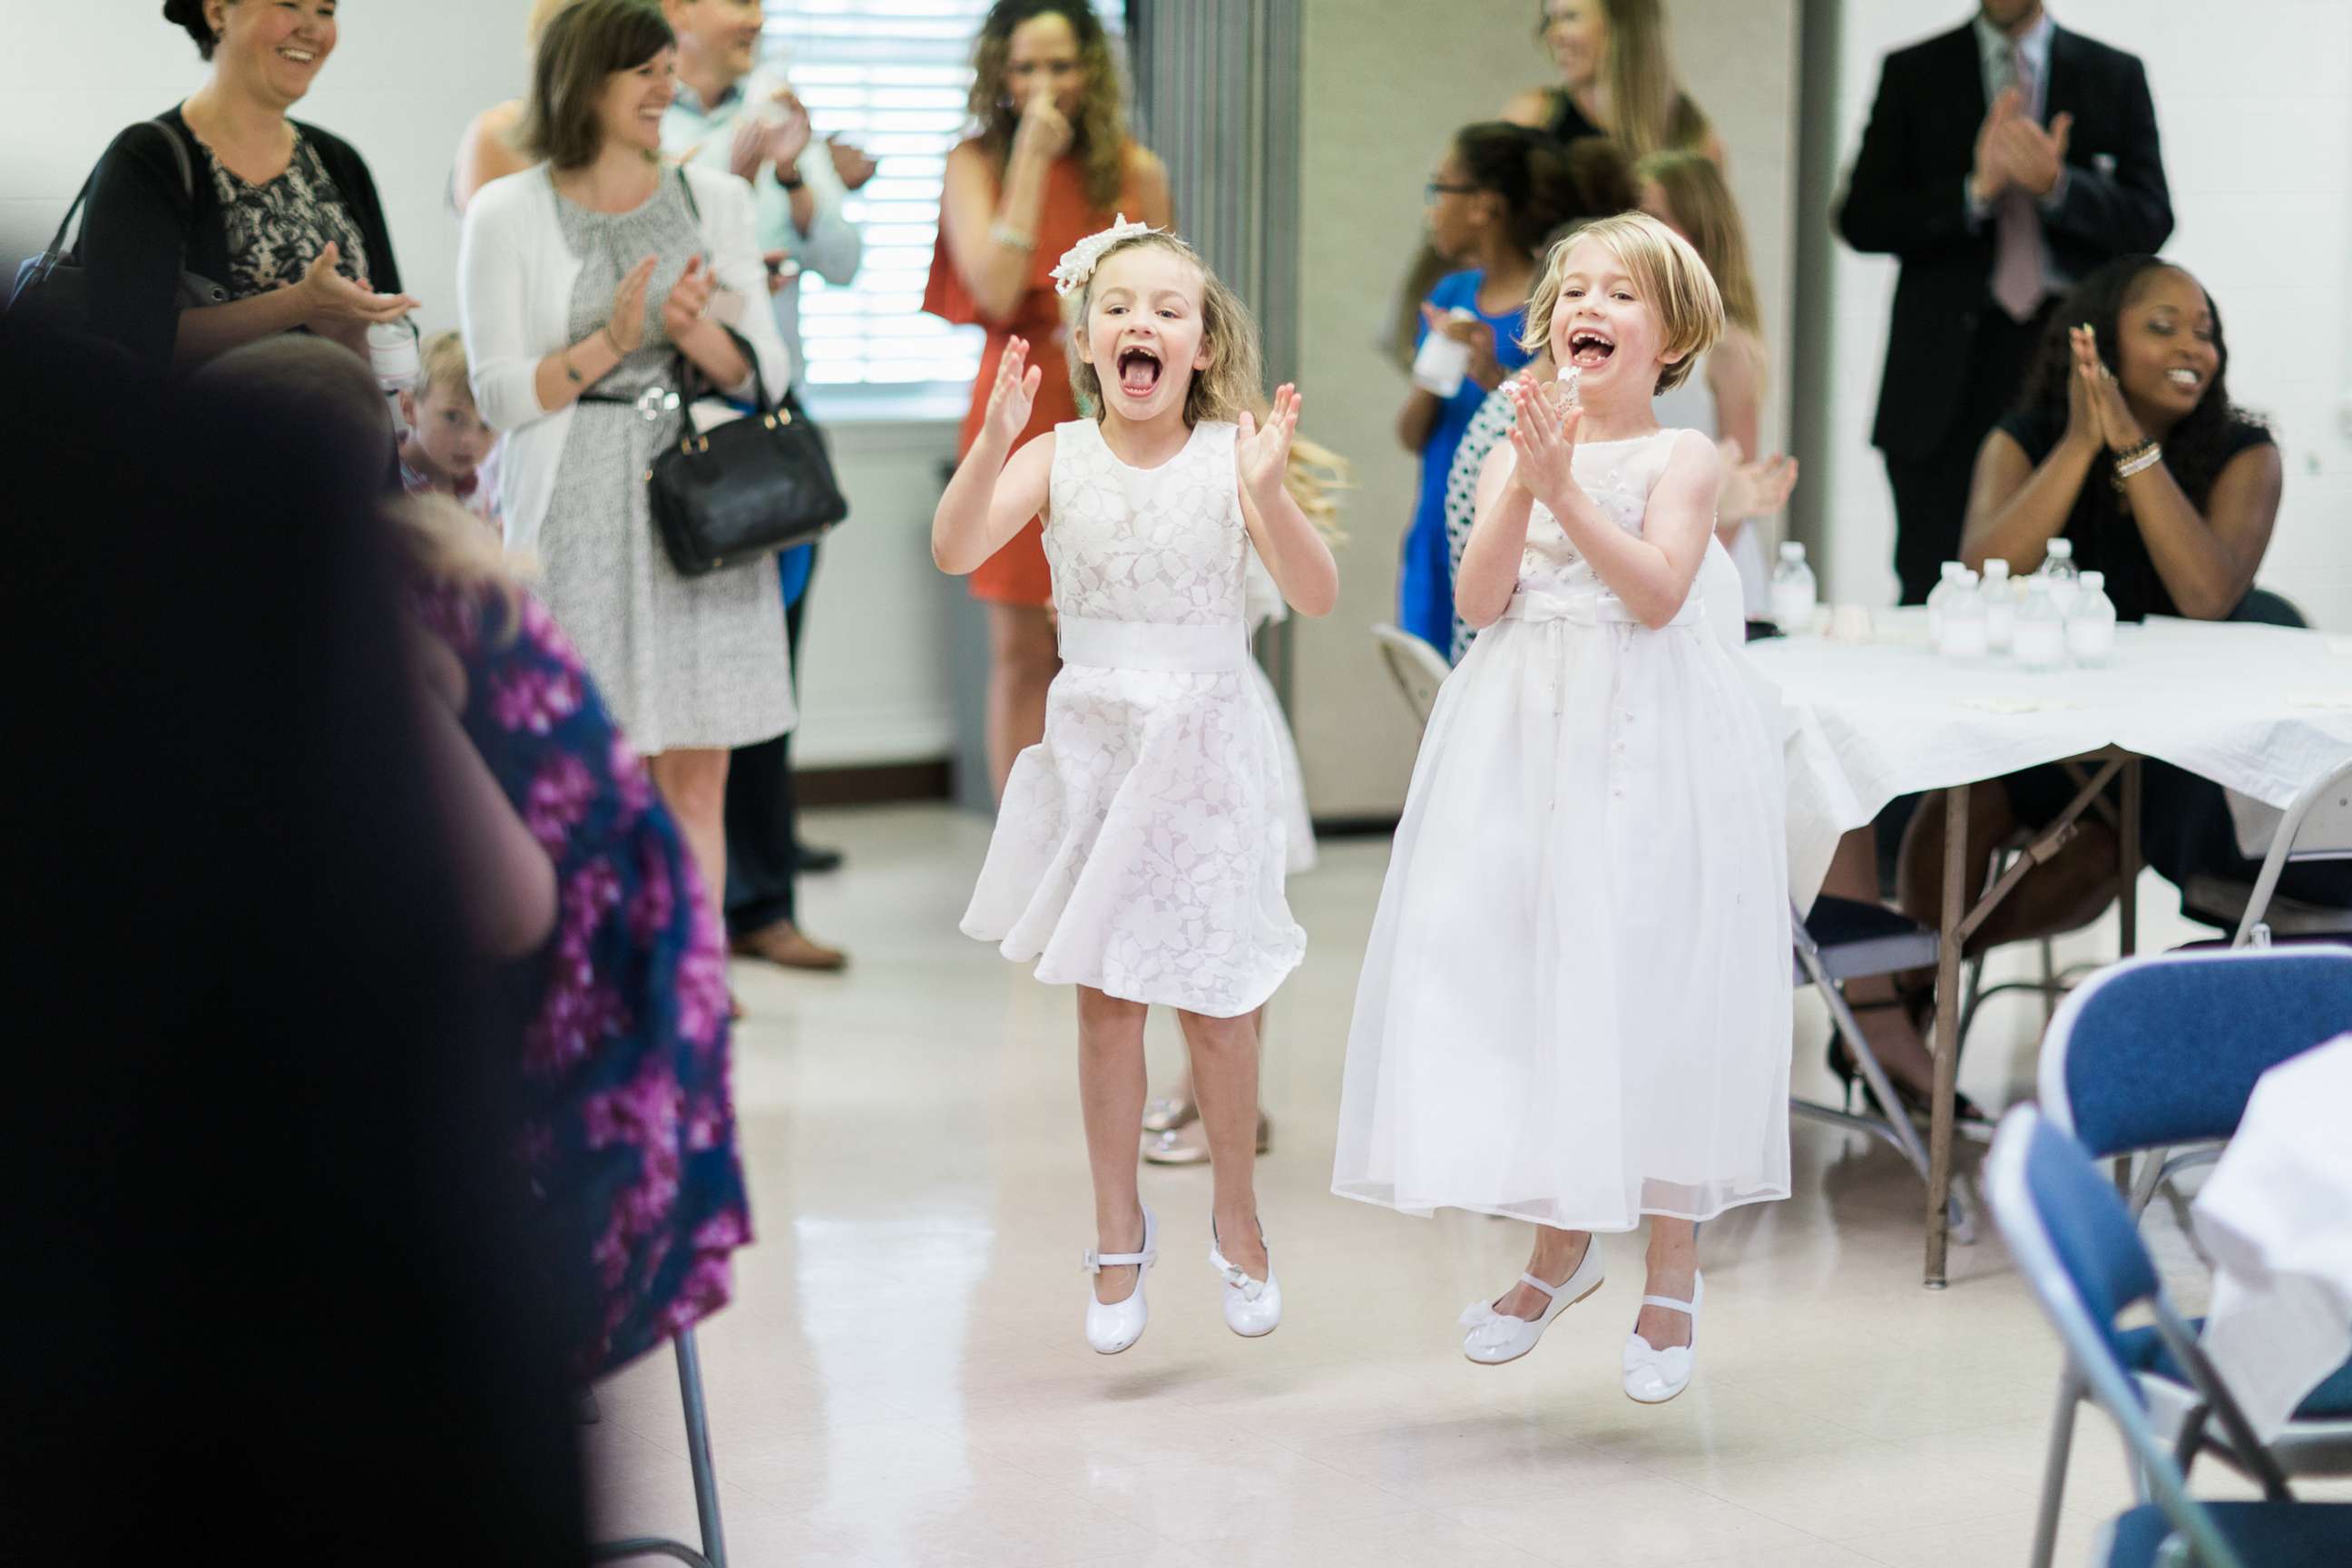 PHOTO: Indianapolis teacher Marielle Slagel Keller asked her students be her flower girls and ring bearers in her June 24 wedding.